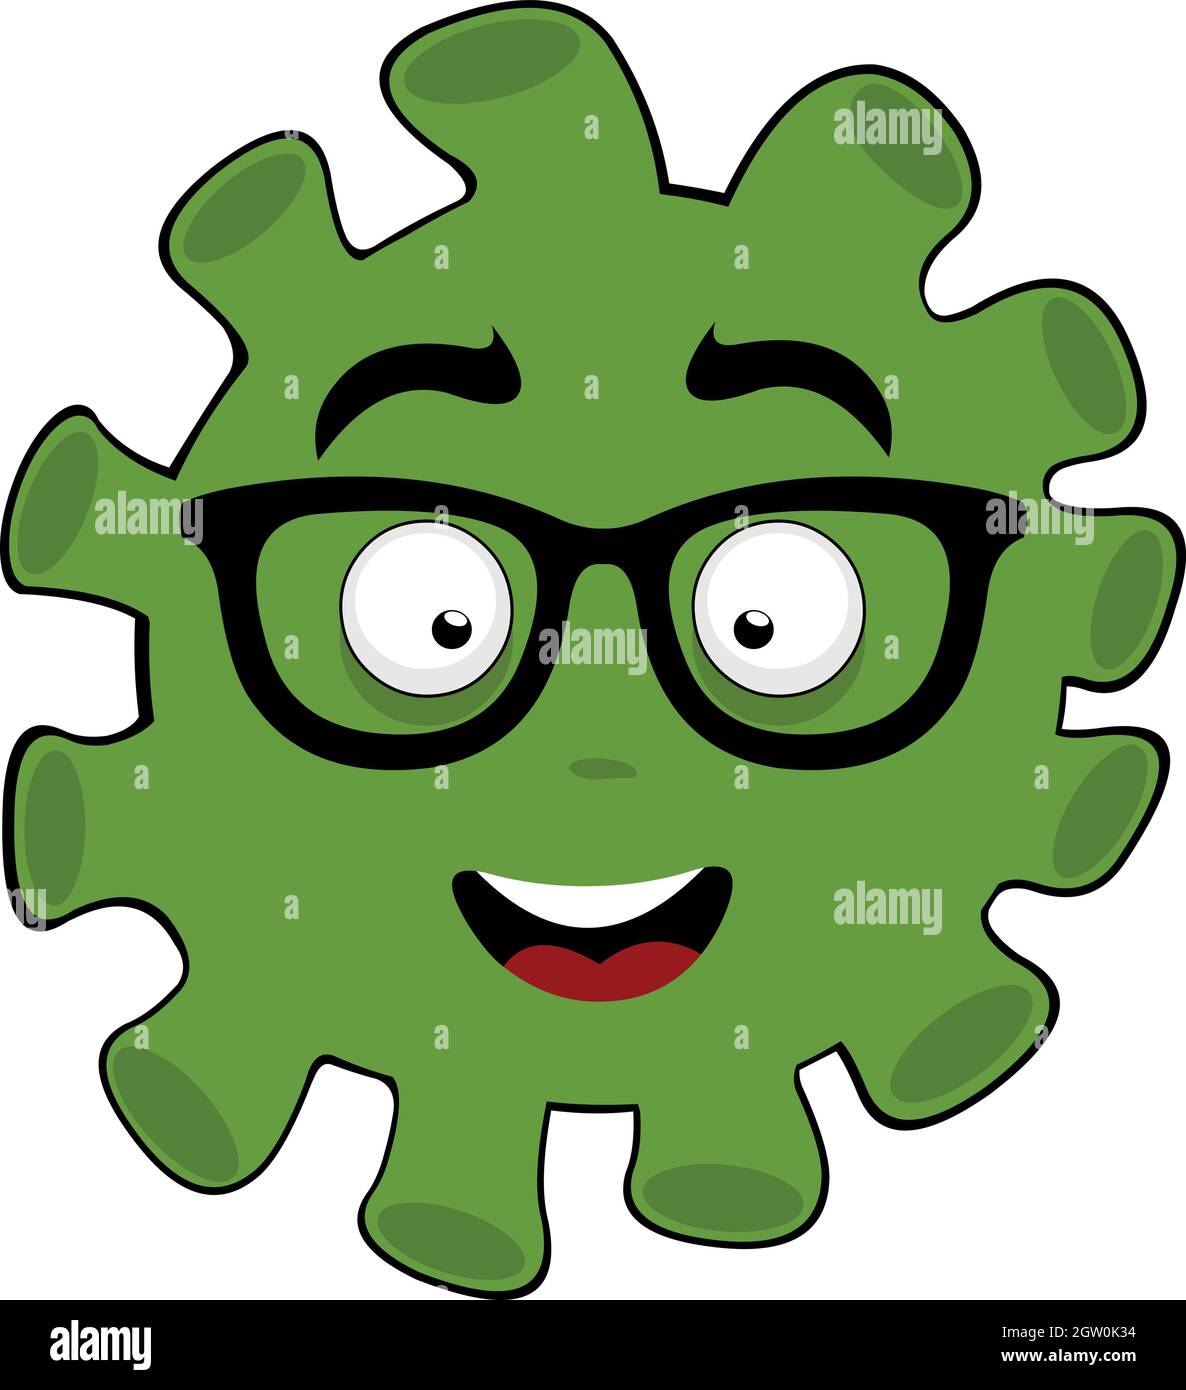 Vector emoticon illustration of virus, microbe or bacteria cartoon character with nerd glasses Stock Vector